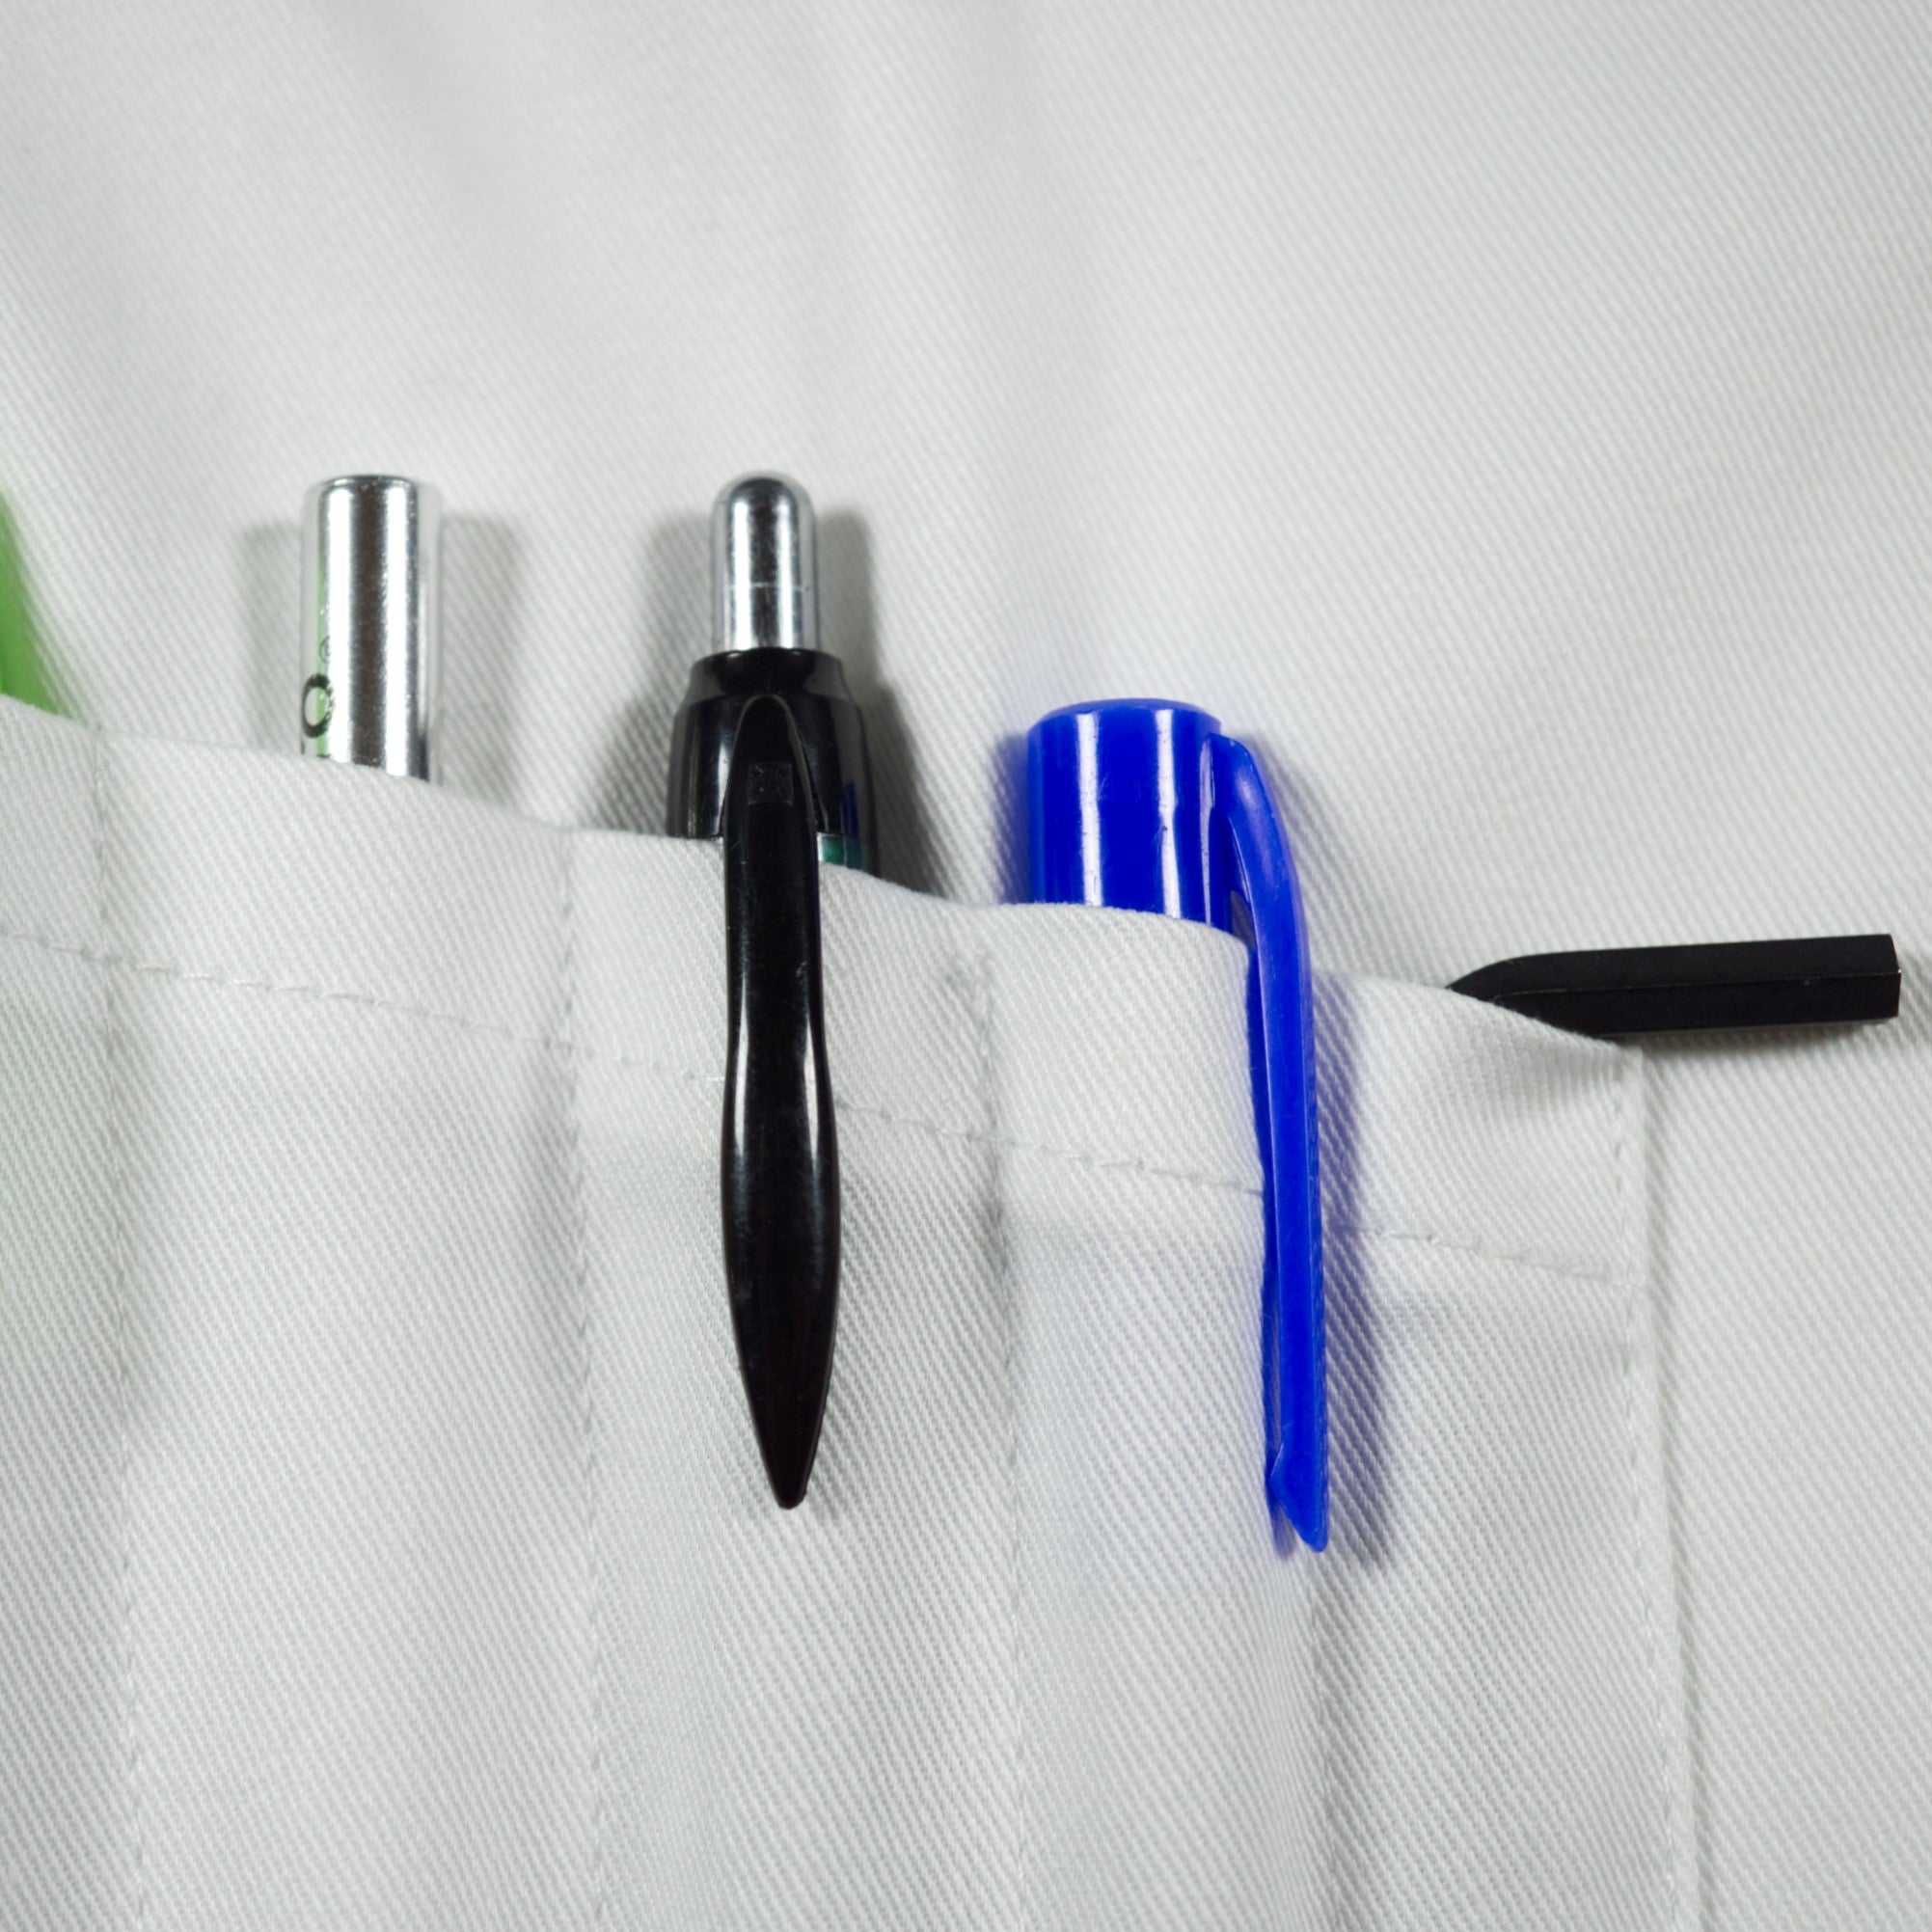 In a lab coat: choosing the best colored pens